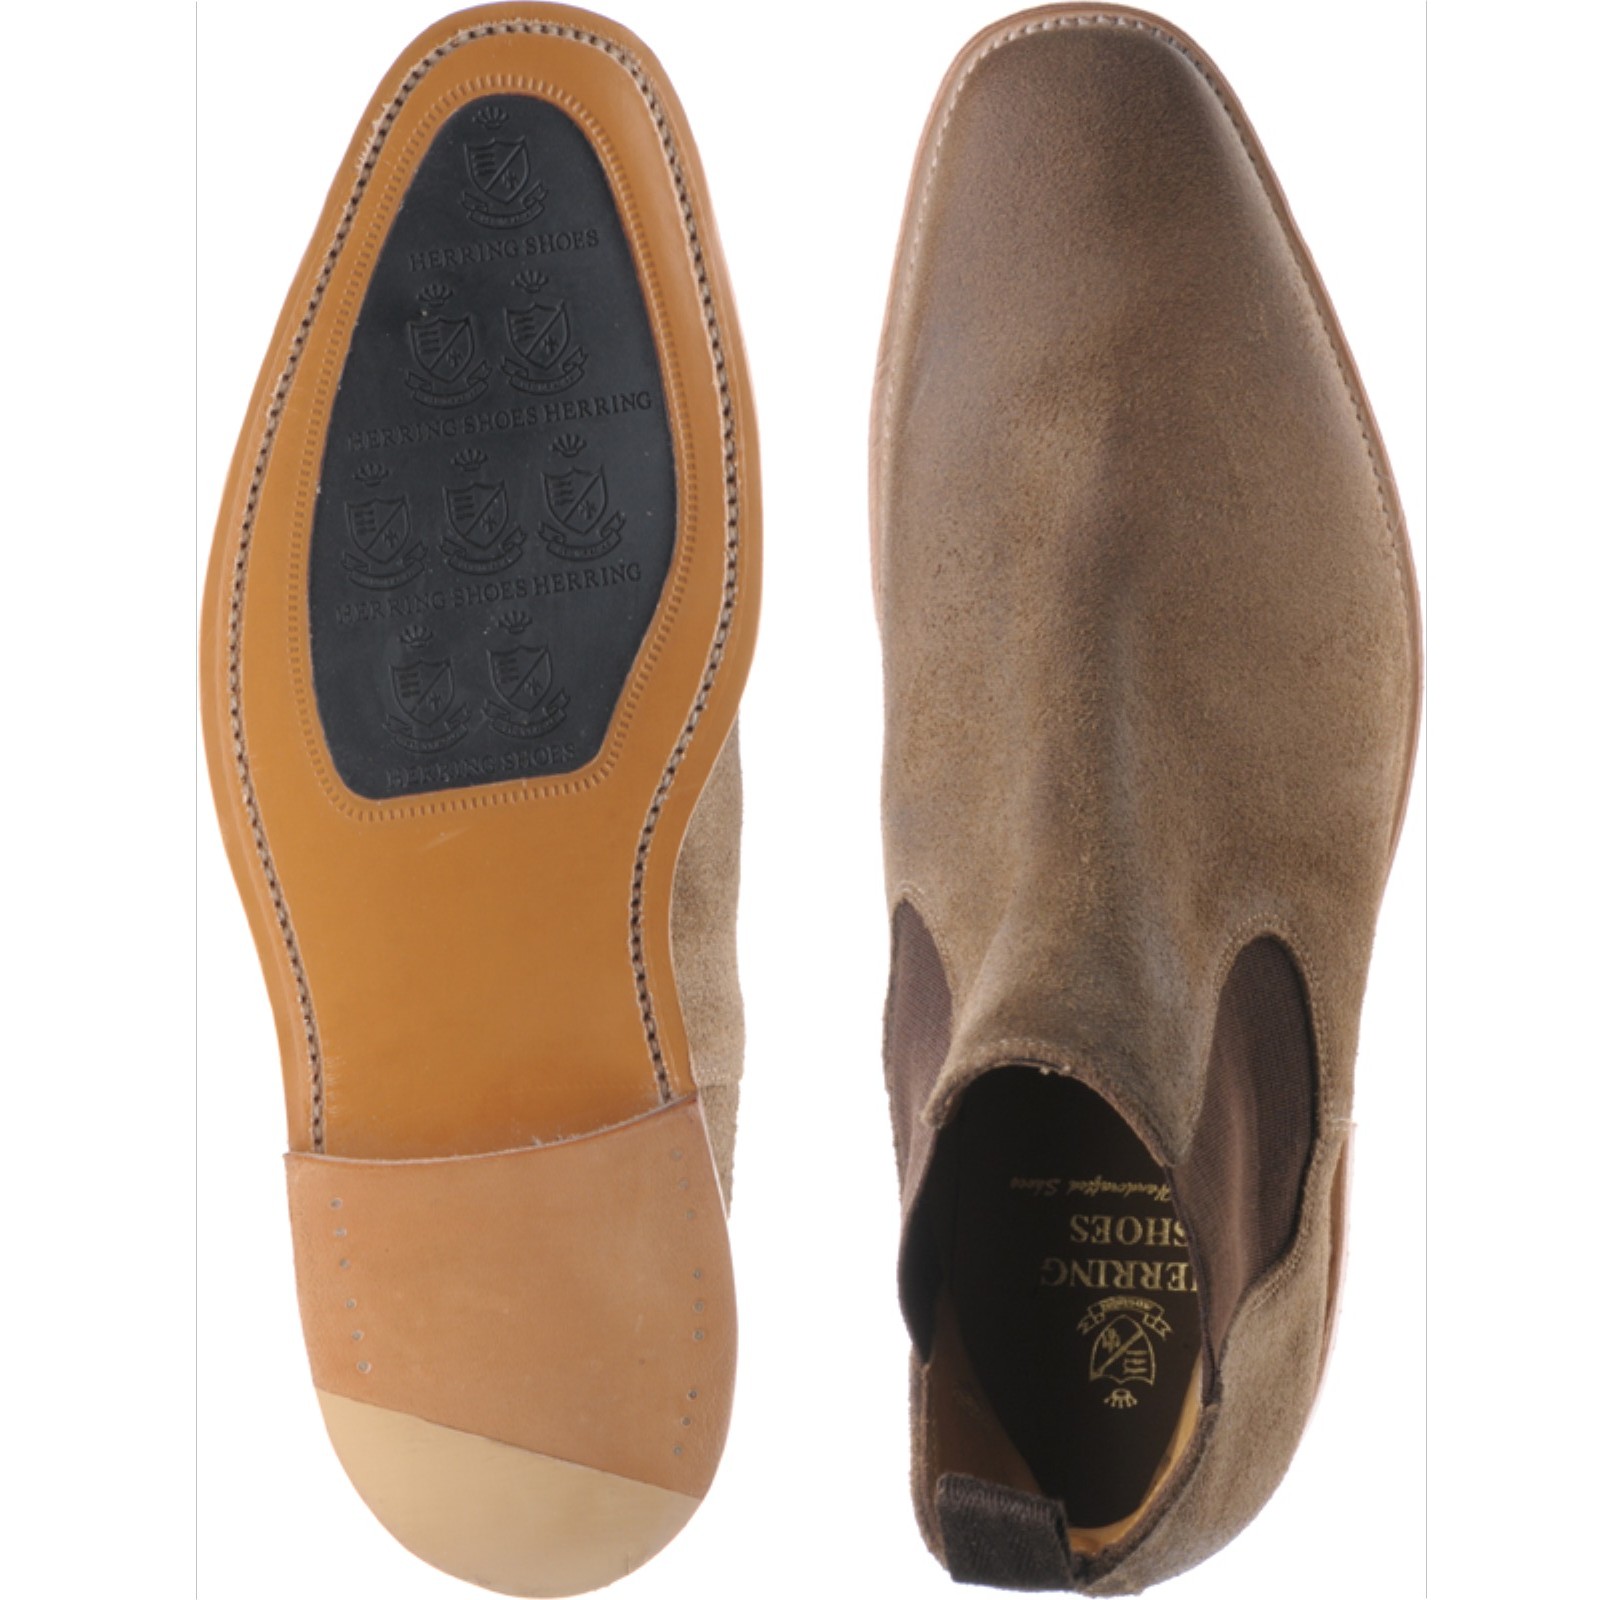 Herring shoes | Herring Classic | Hockley rubber-soled Chelsea boots in ...